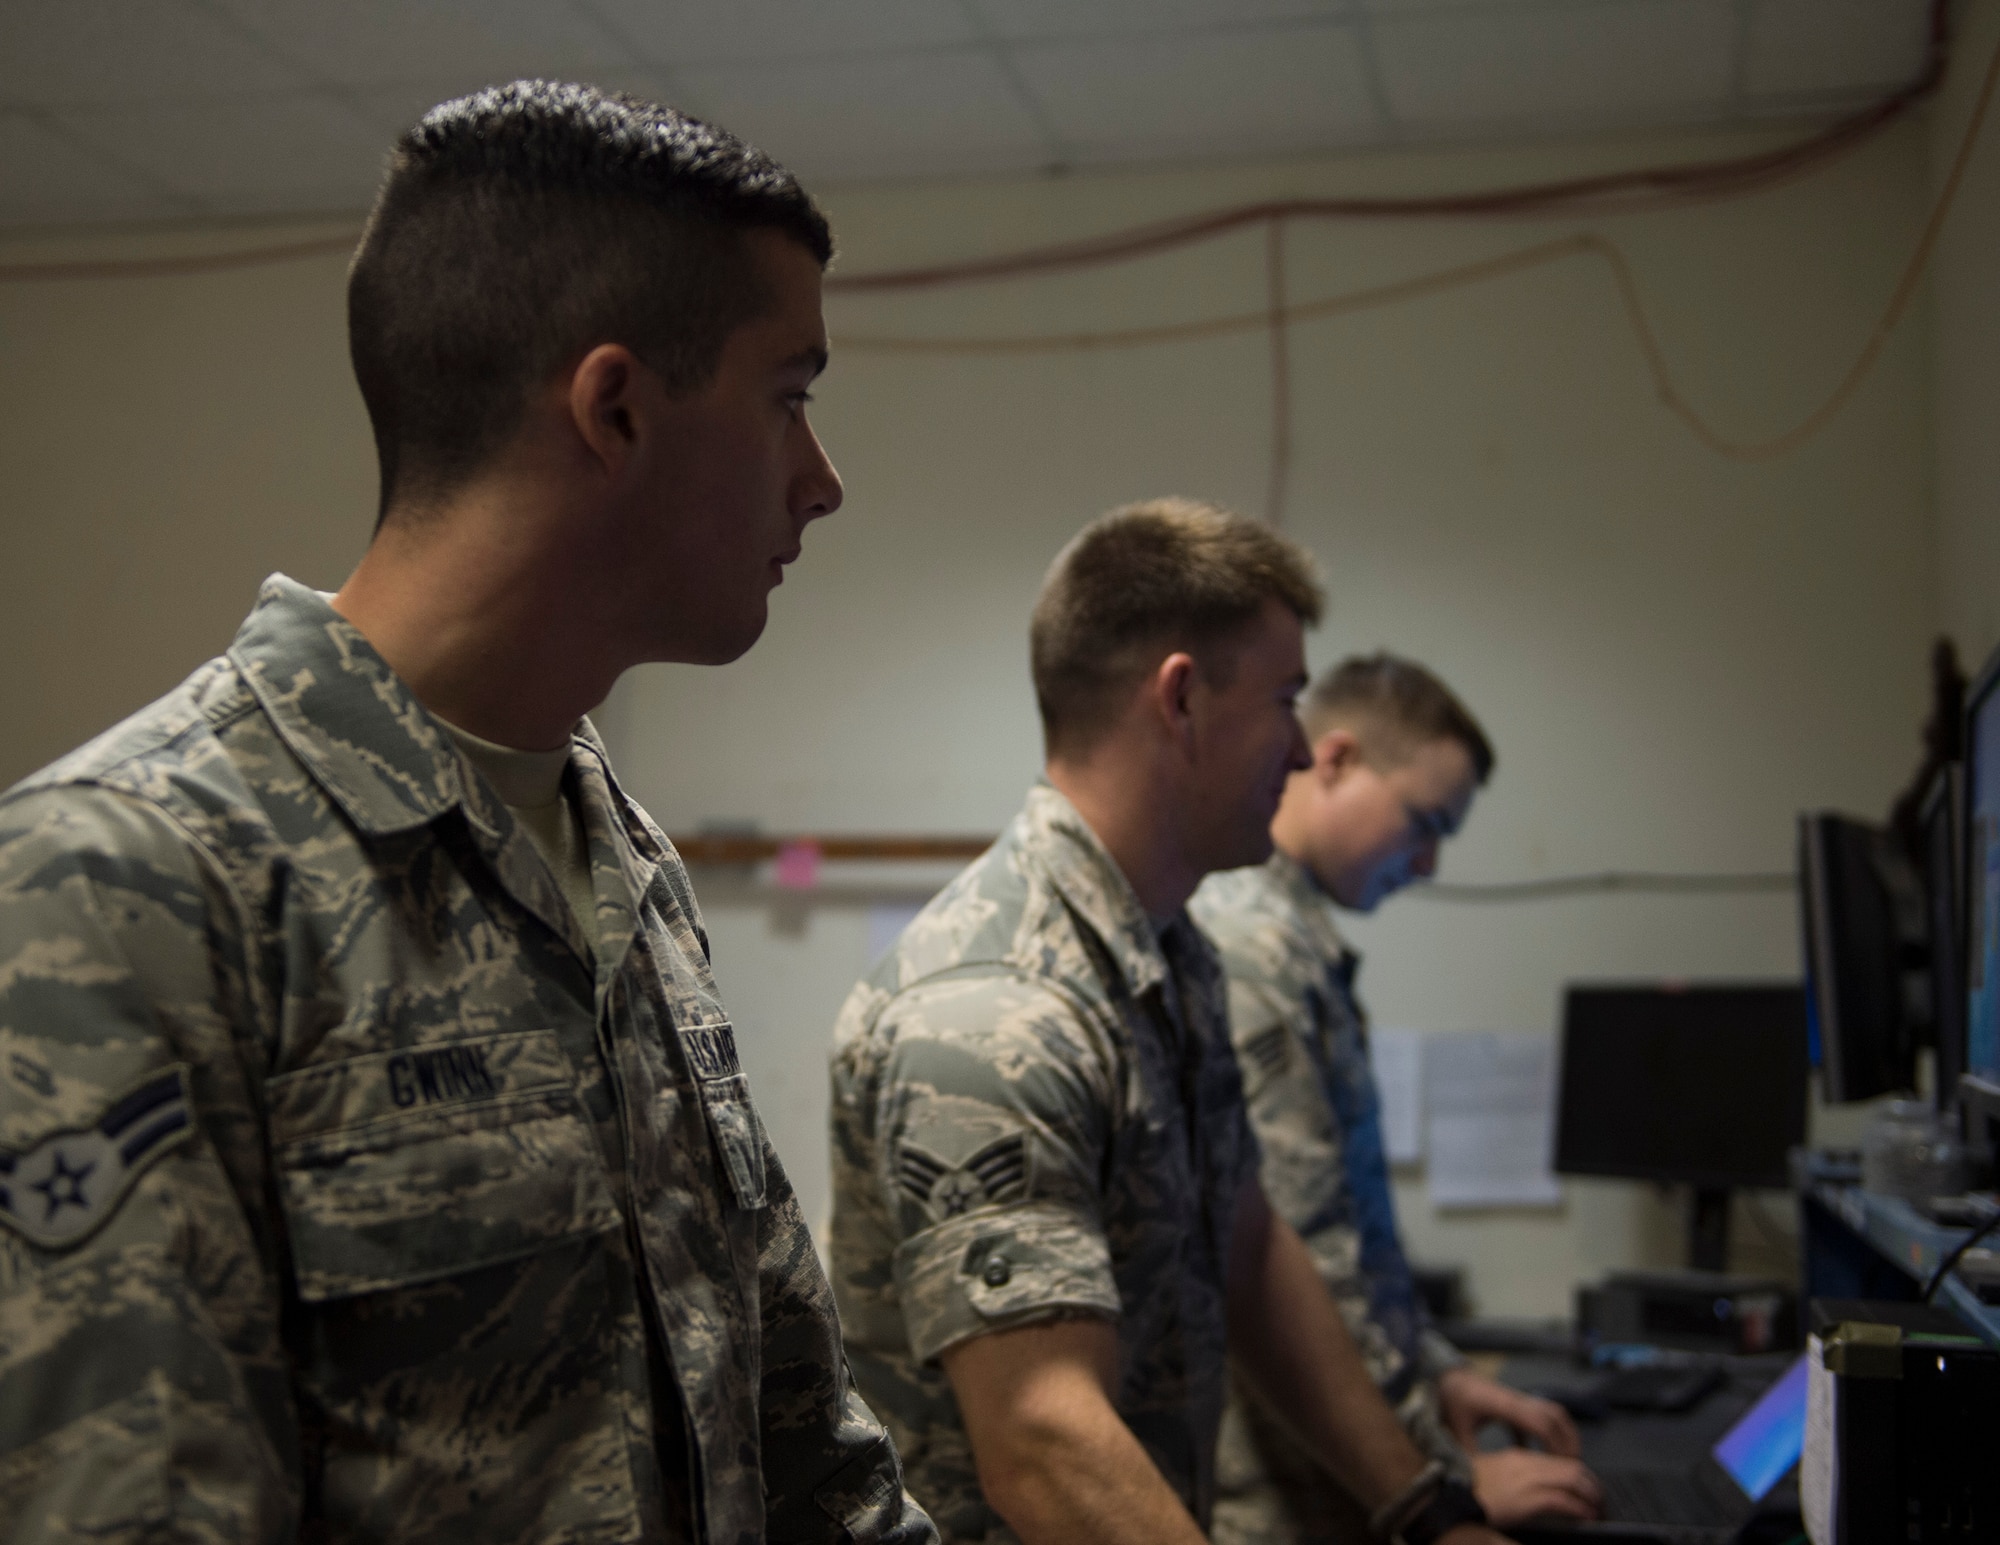 U.S. Air Force Airman 1st Class Robert Gwinn, left, a computer service technician, Senior Airman Andrew Montz, a cyber transport technician, and Airman 1st Class Ethan Morgan, a computer service technician with the 379th Expeditionary Communication Squadron, troubleshoot computer problems at Al Udeid Air Base, Qatar, July 14, 2017. The Airmen are responsible for installing programs, troubleshooting and repairing computer problems, and ensuring that all of the hardware and software systems are functional. (U.S. Air Force photo by Tech. Sgt. Amy M. Lovgren)